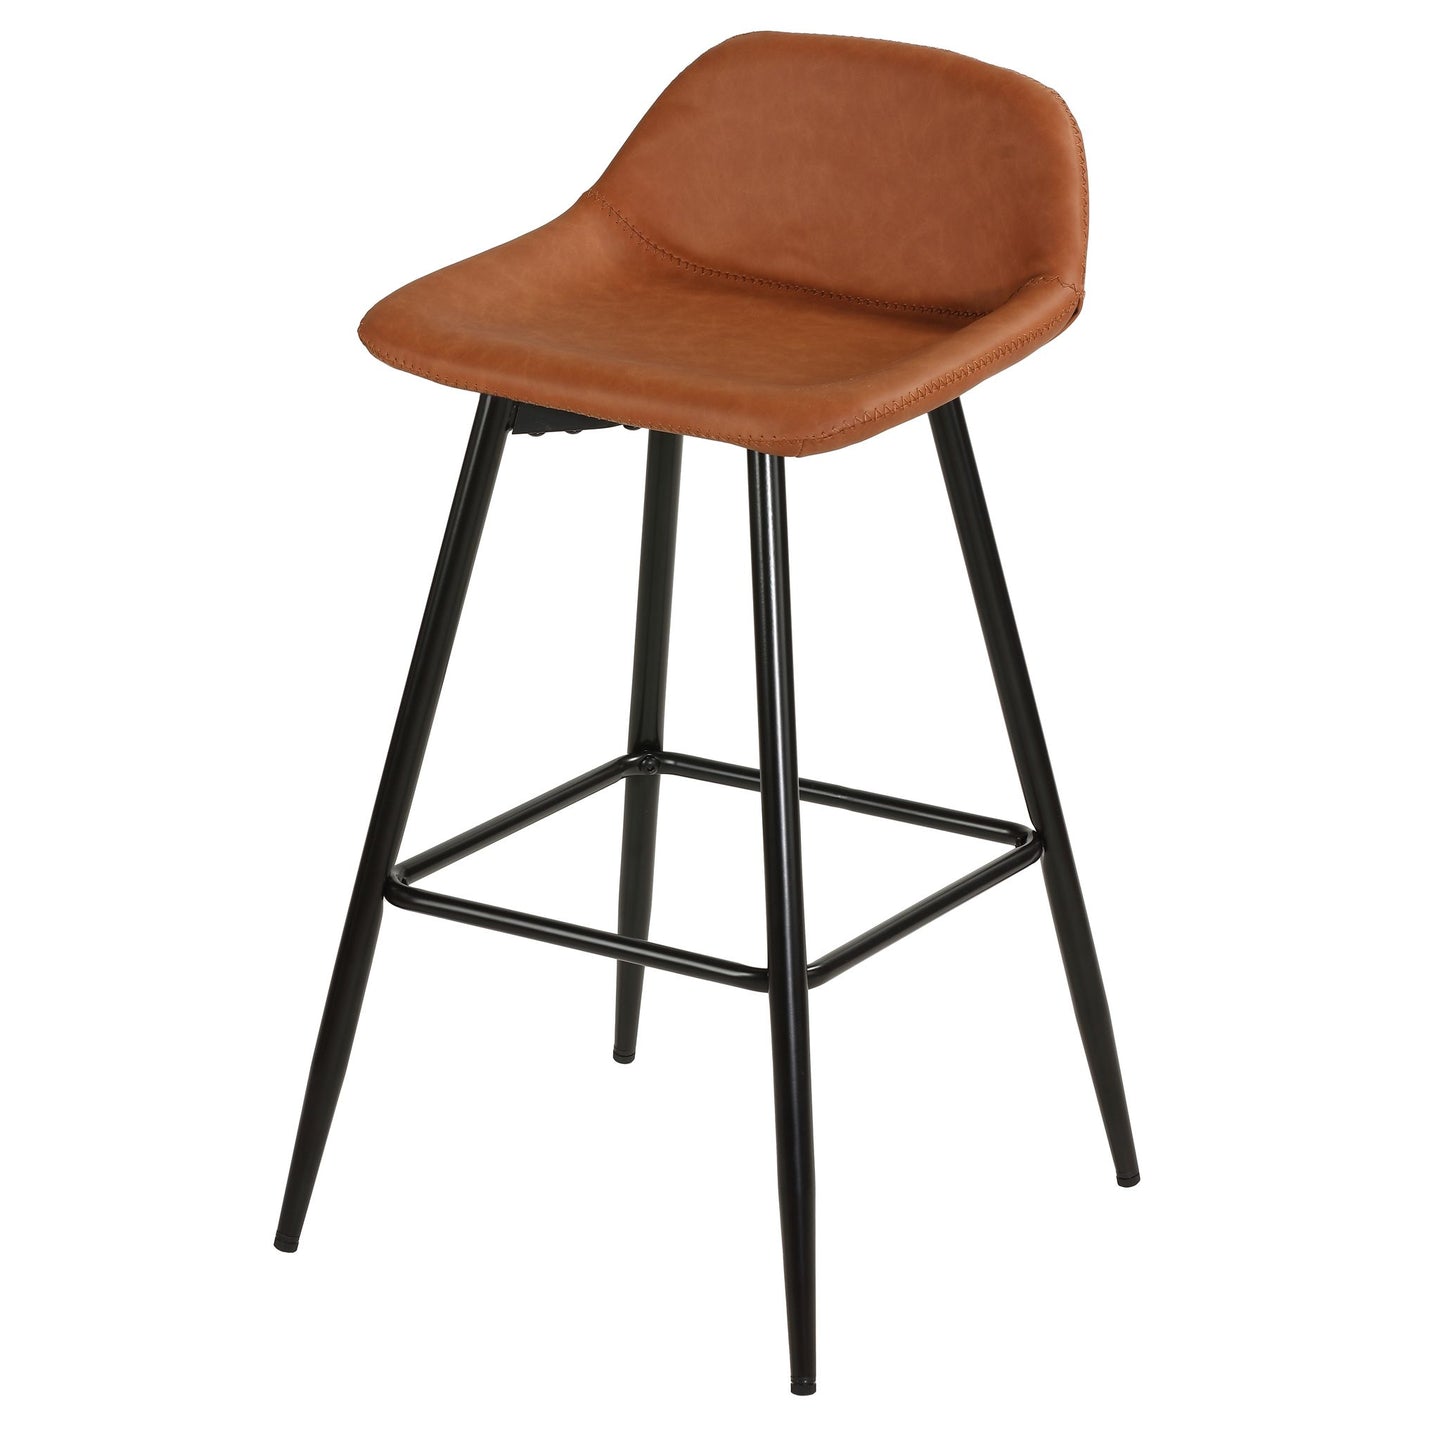 Cortesi Home Rain Counterstools in Brown Faux Leather, Black Base (Set of 2)